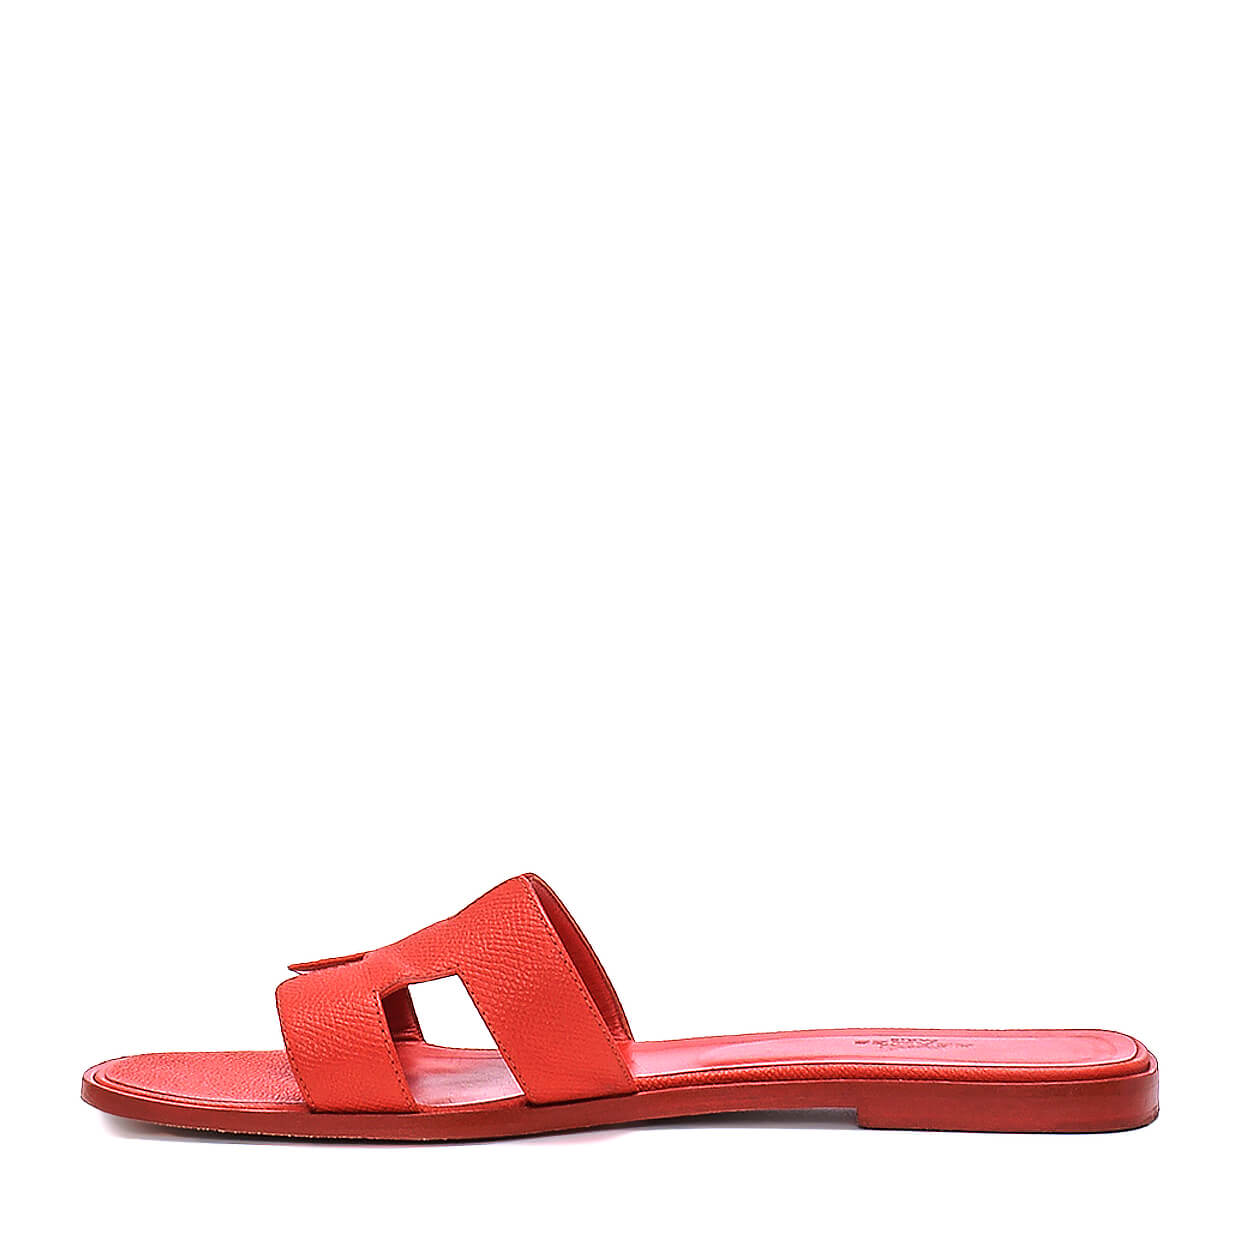 Hermes - Coral Grained Leather Oran Sandals